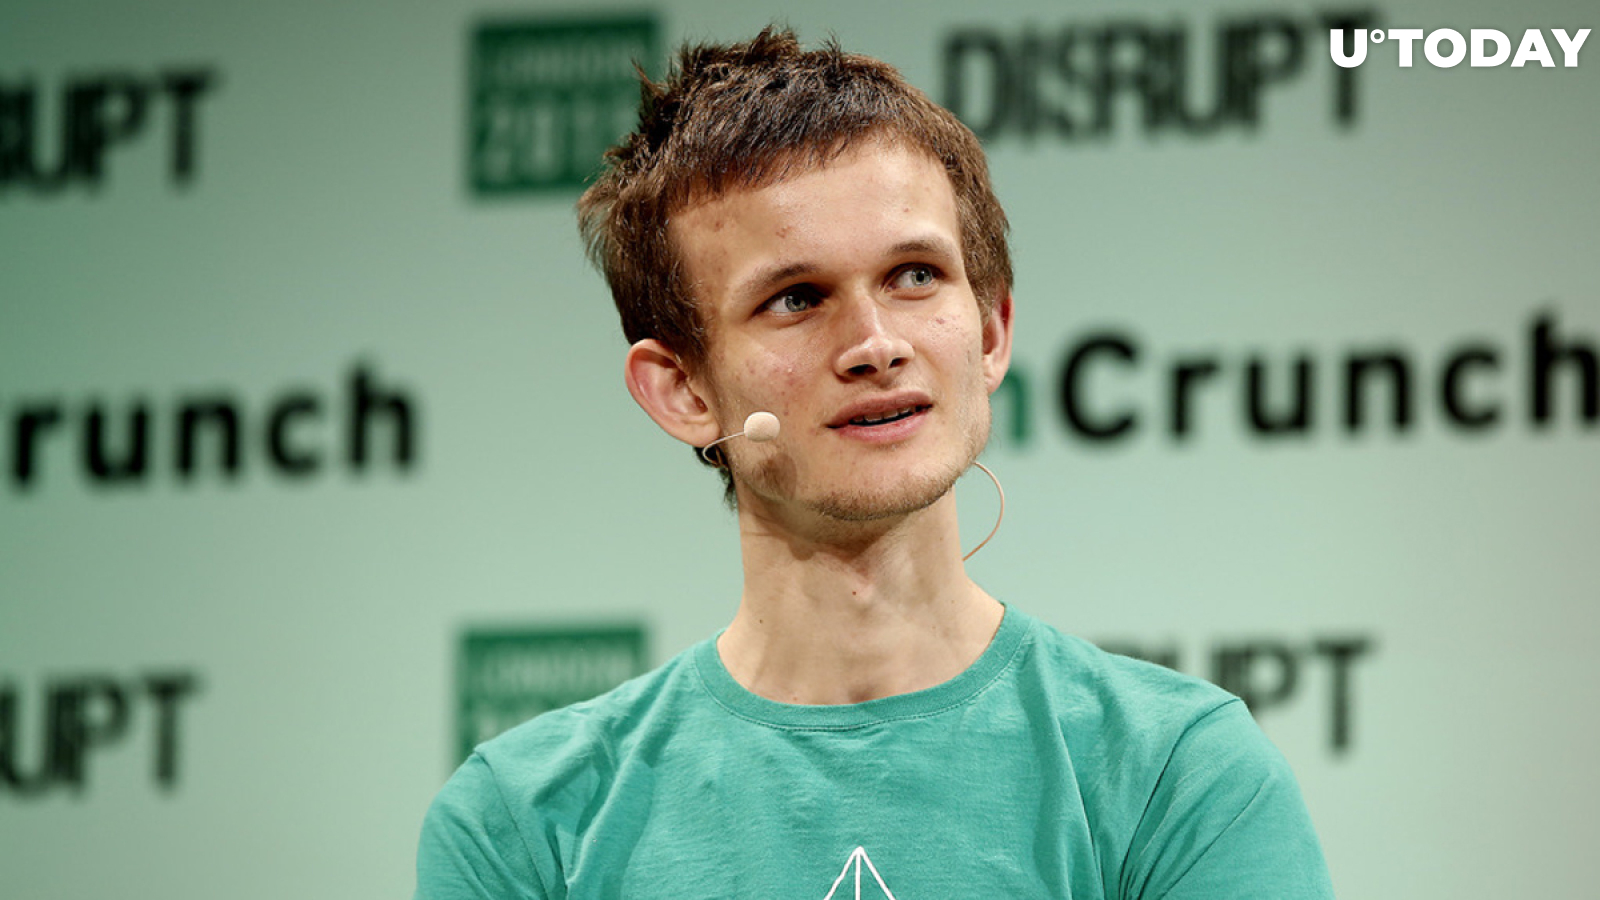 I’m Glad That Hacker Motivated by Bitcoin Profits Attacked Twitter: Vitalik Buterin